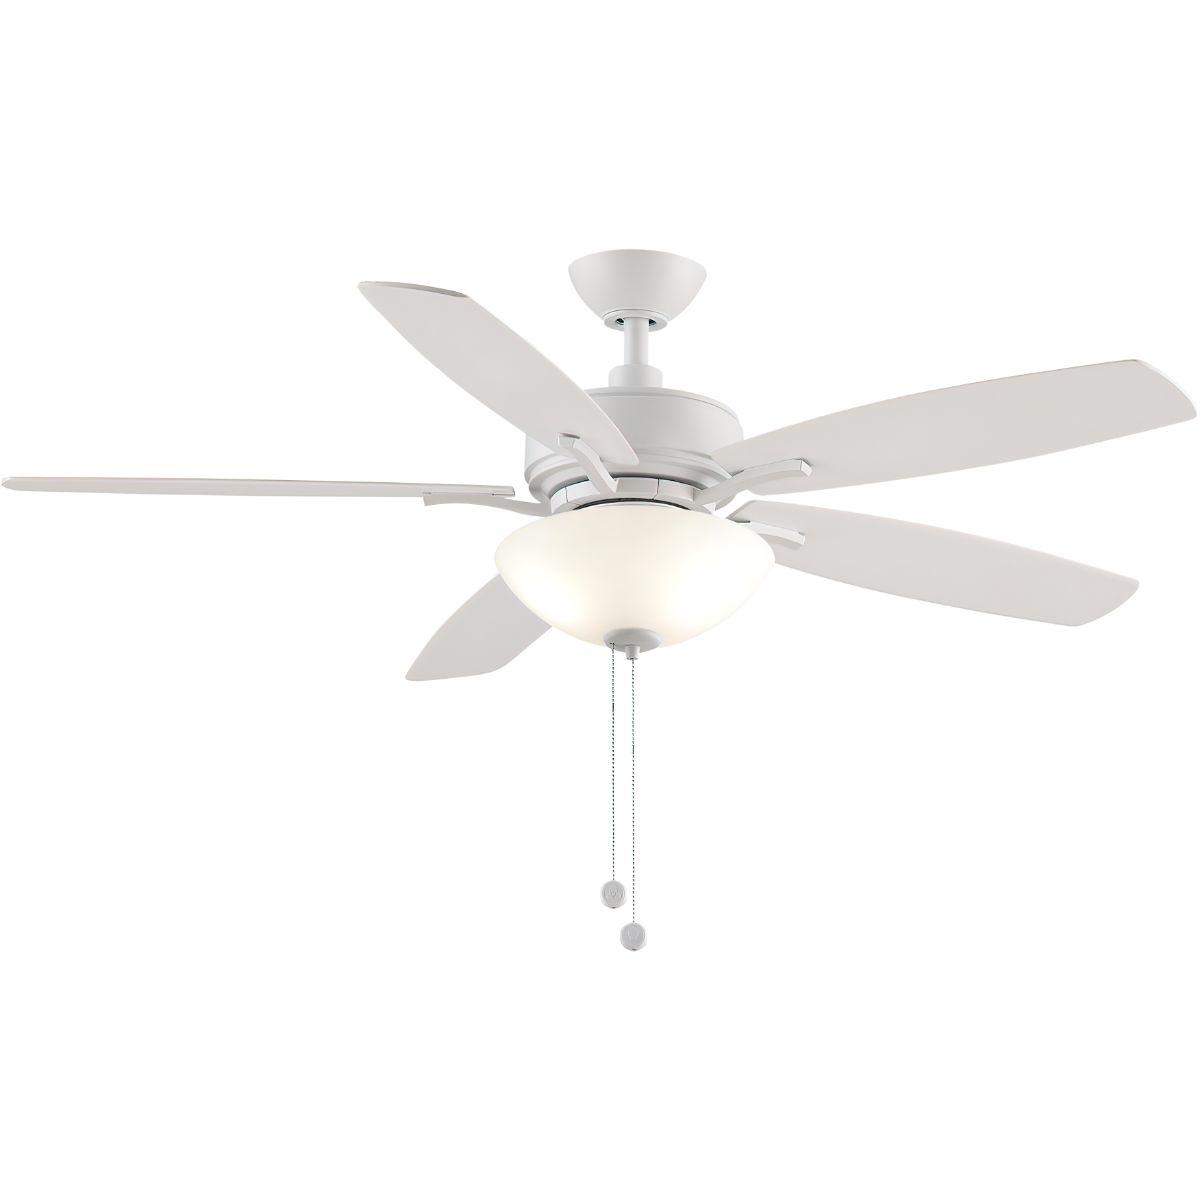 Aire Deluxe 5 Blades 52 Inch Ceiling Fan With Light And Pull Chain